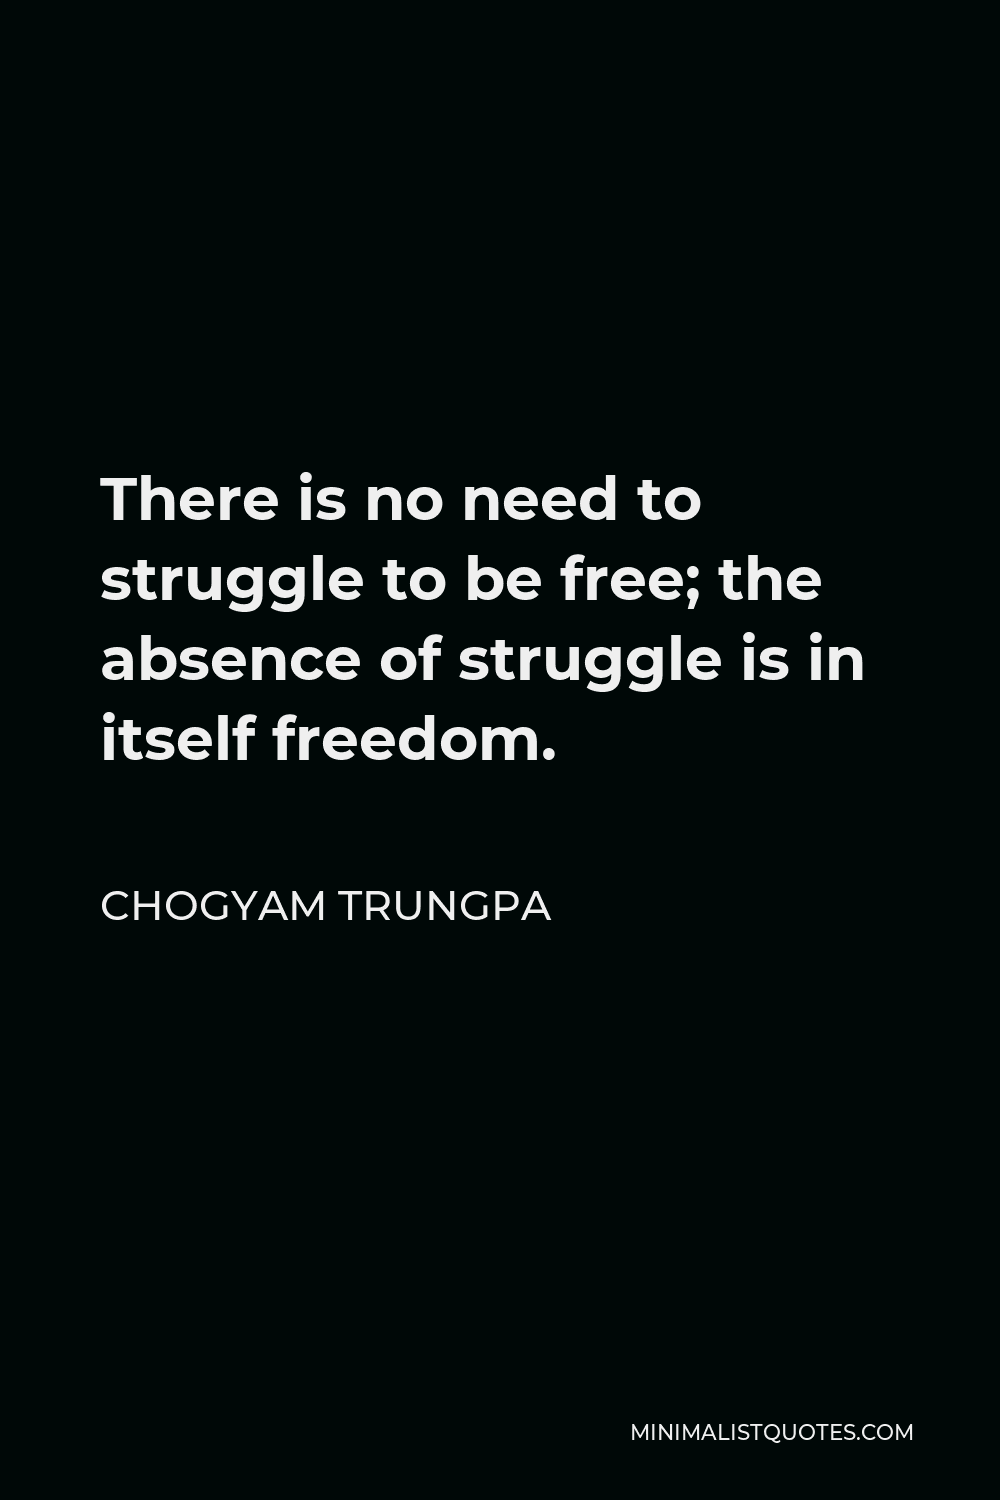 Chogyam Trungpa Quote - There is no need to struggle to be free; the absence of struggle is in itself freedom.